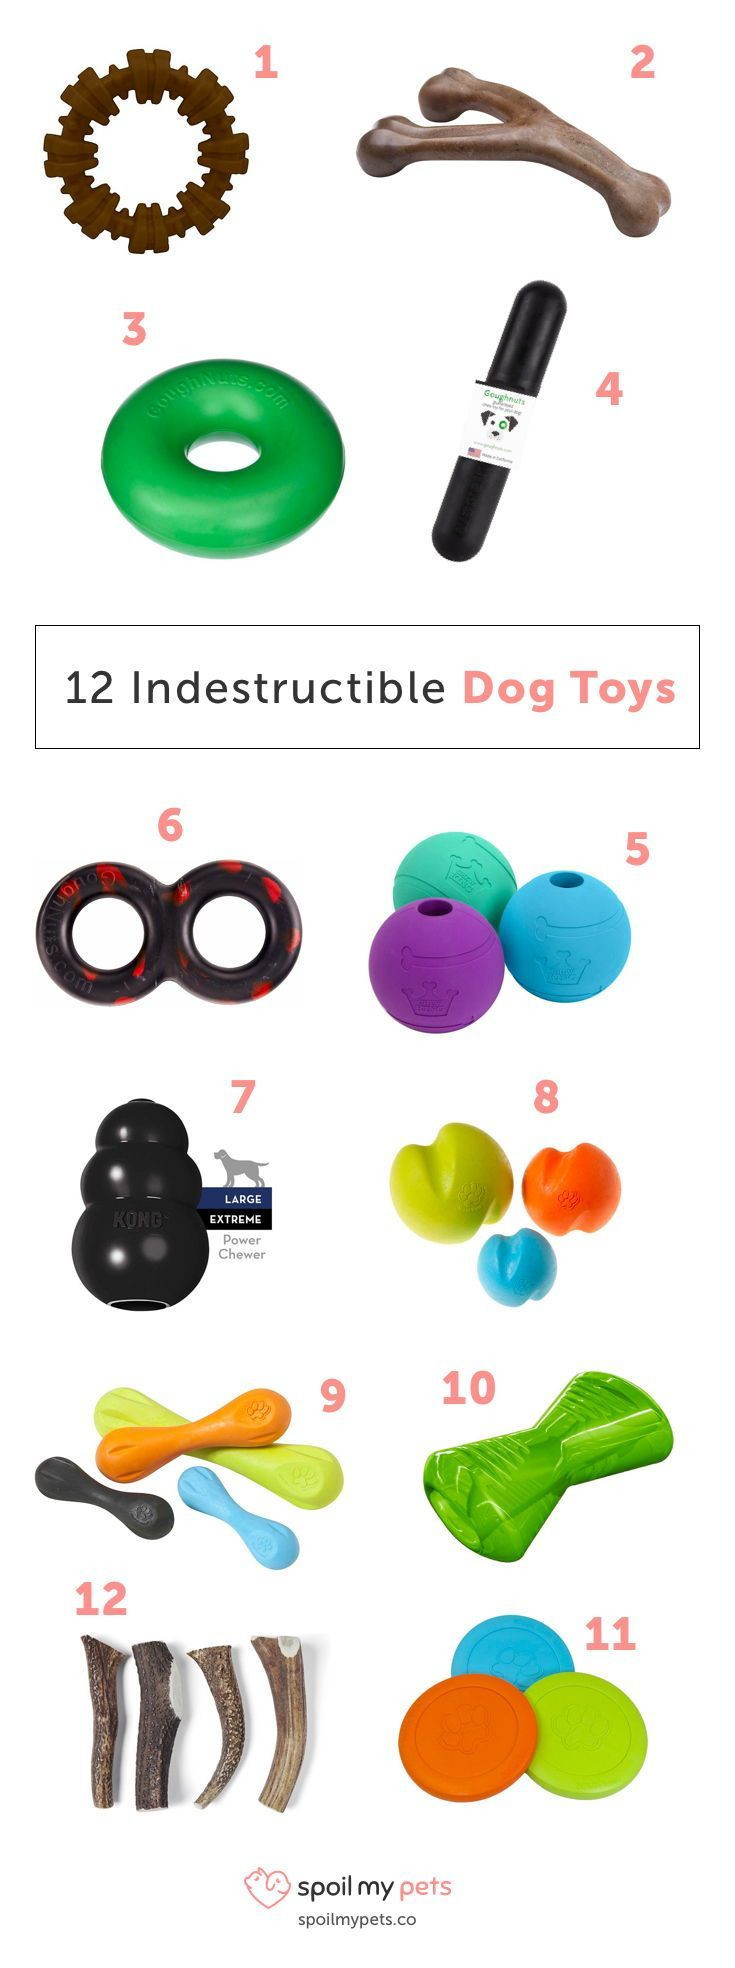 DIY Indestructible Dog Toys
 12 Most Indestructible Dog Toys Your Dog Will Love